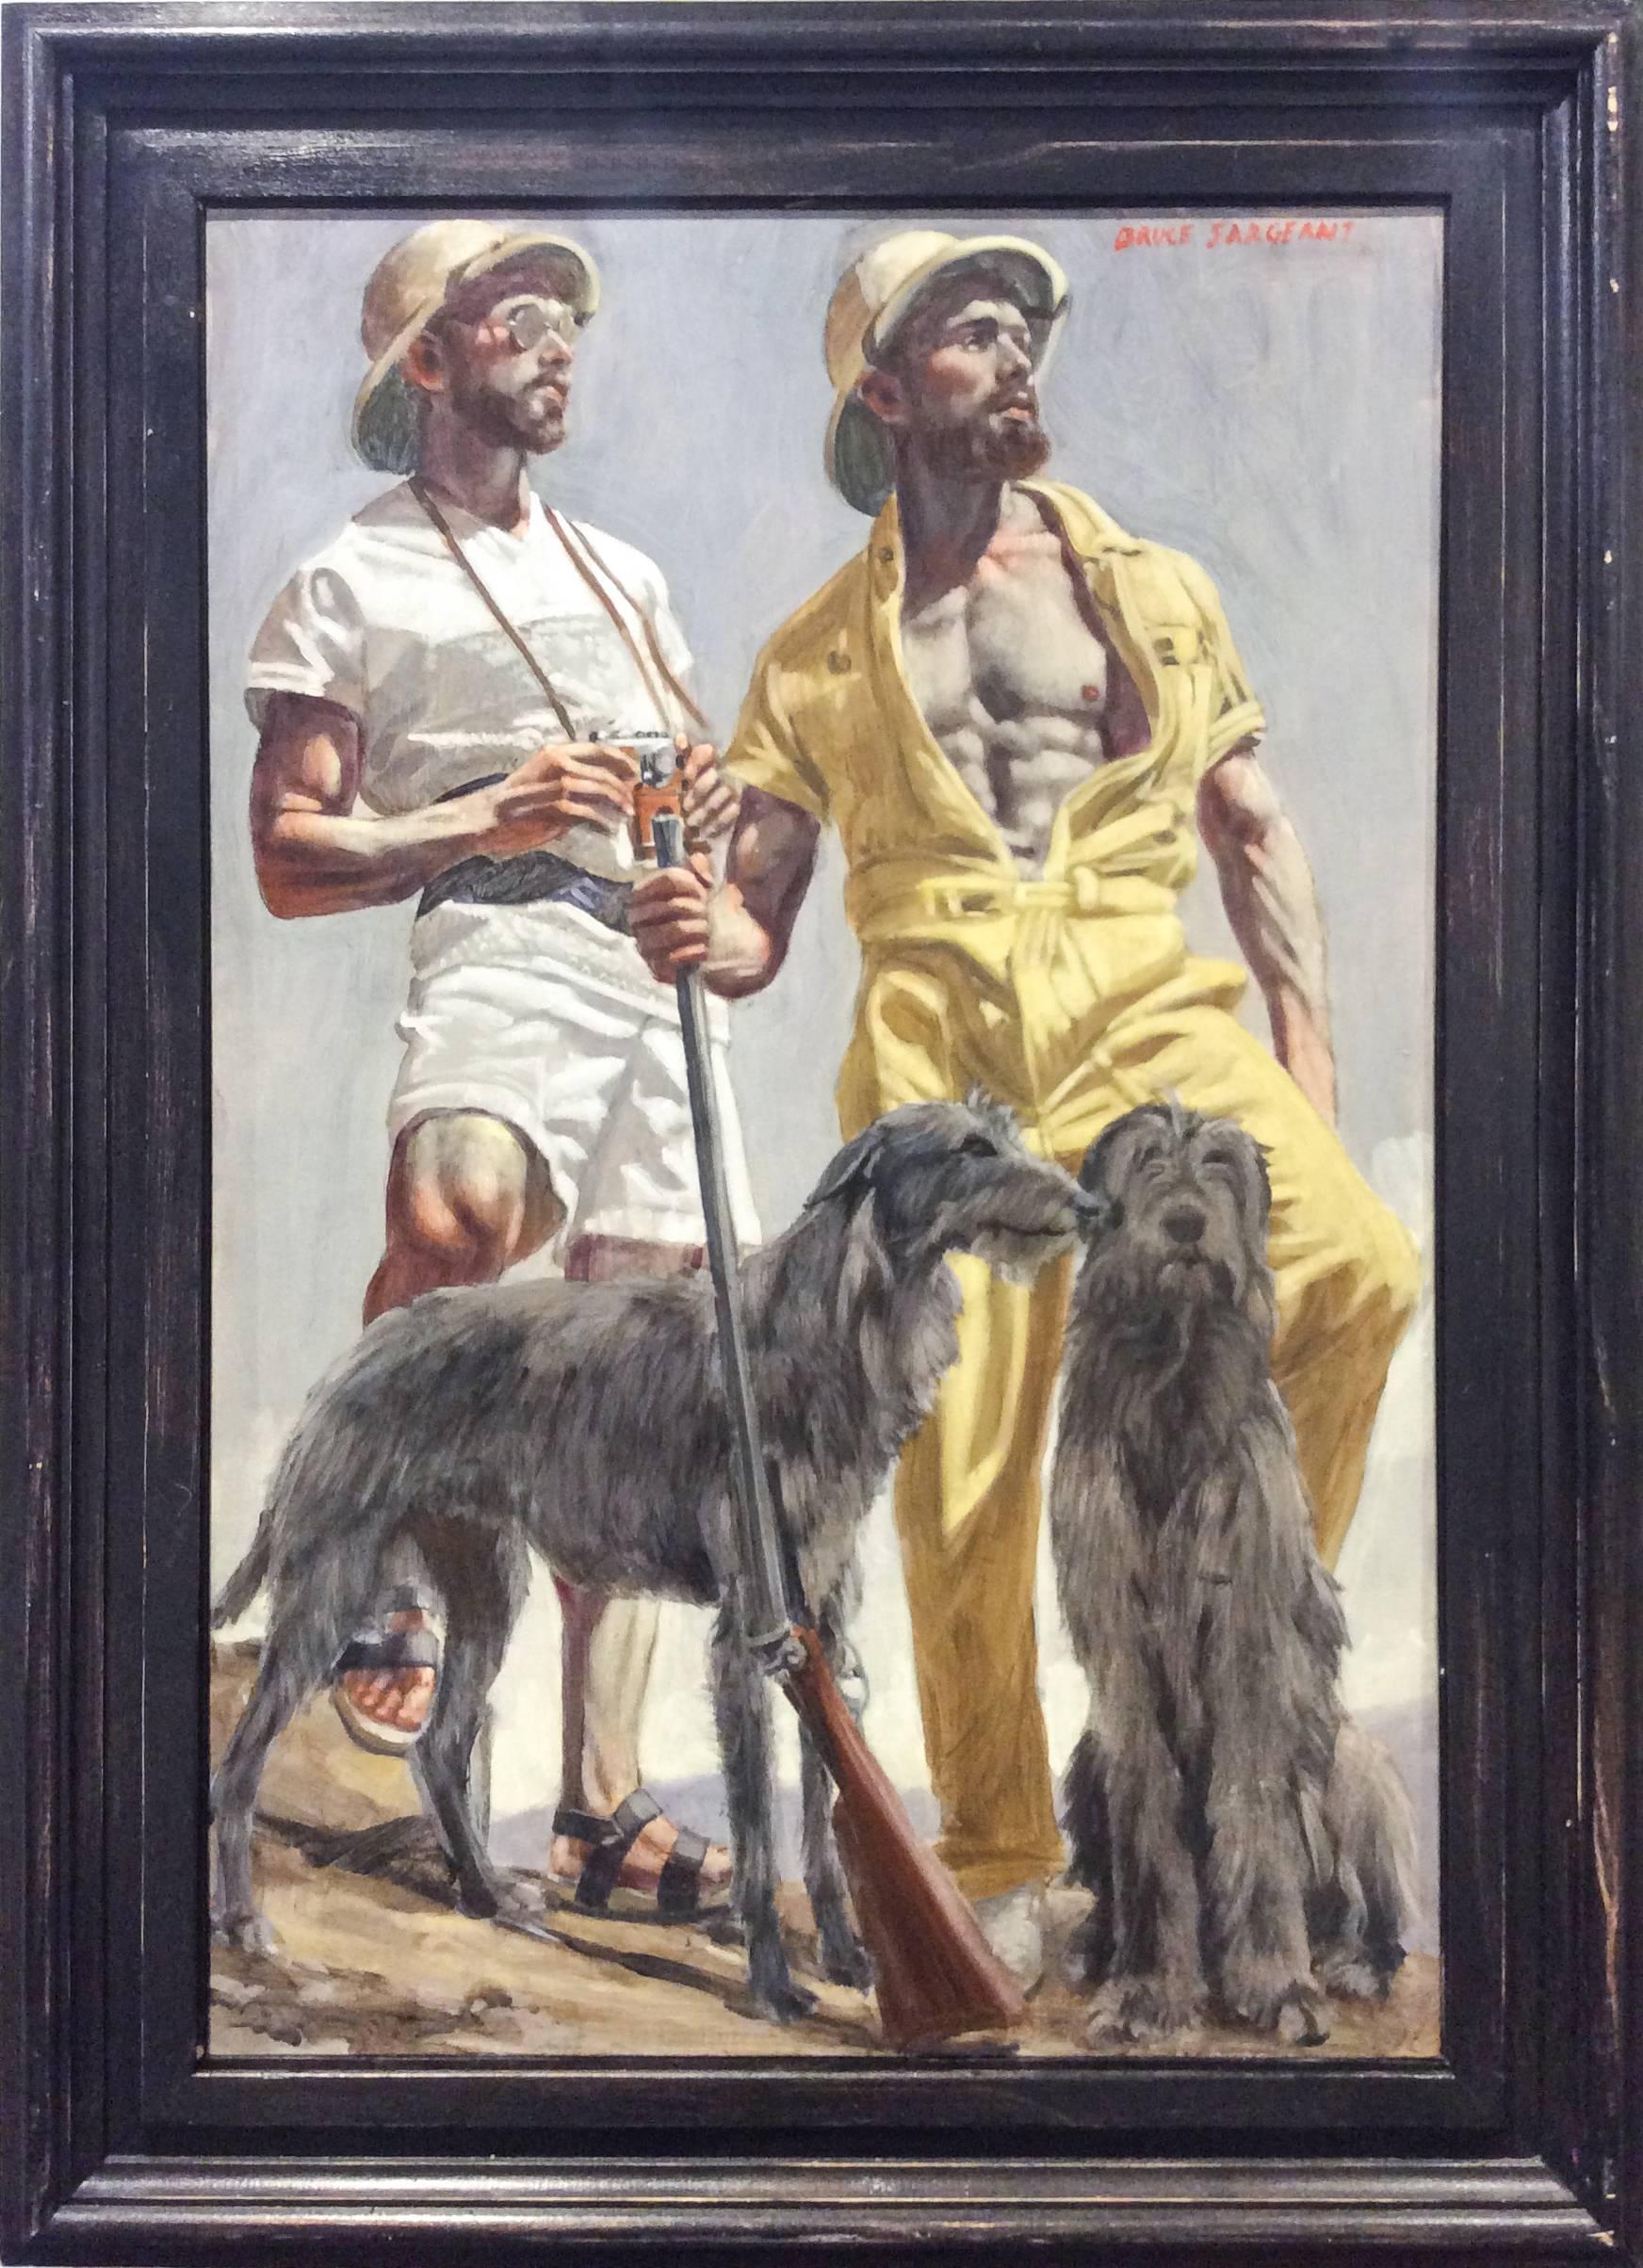 Mark Beard Figurative Painting - Two Men on Safari (Modern Figurative Oil Painting of Two Stylish Men with Dogs)